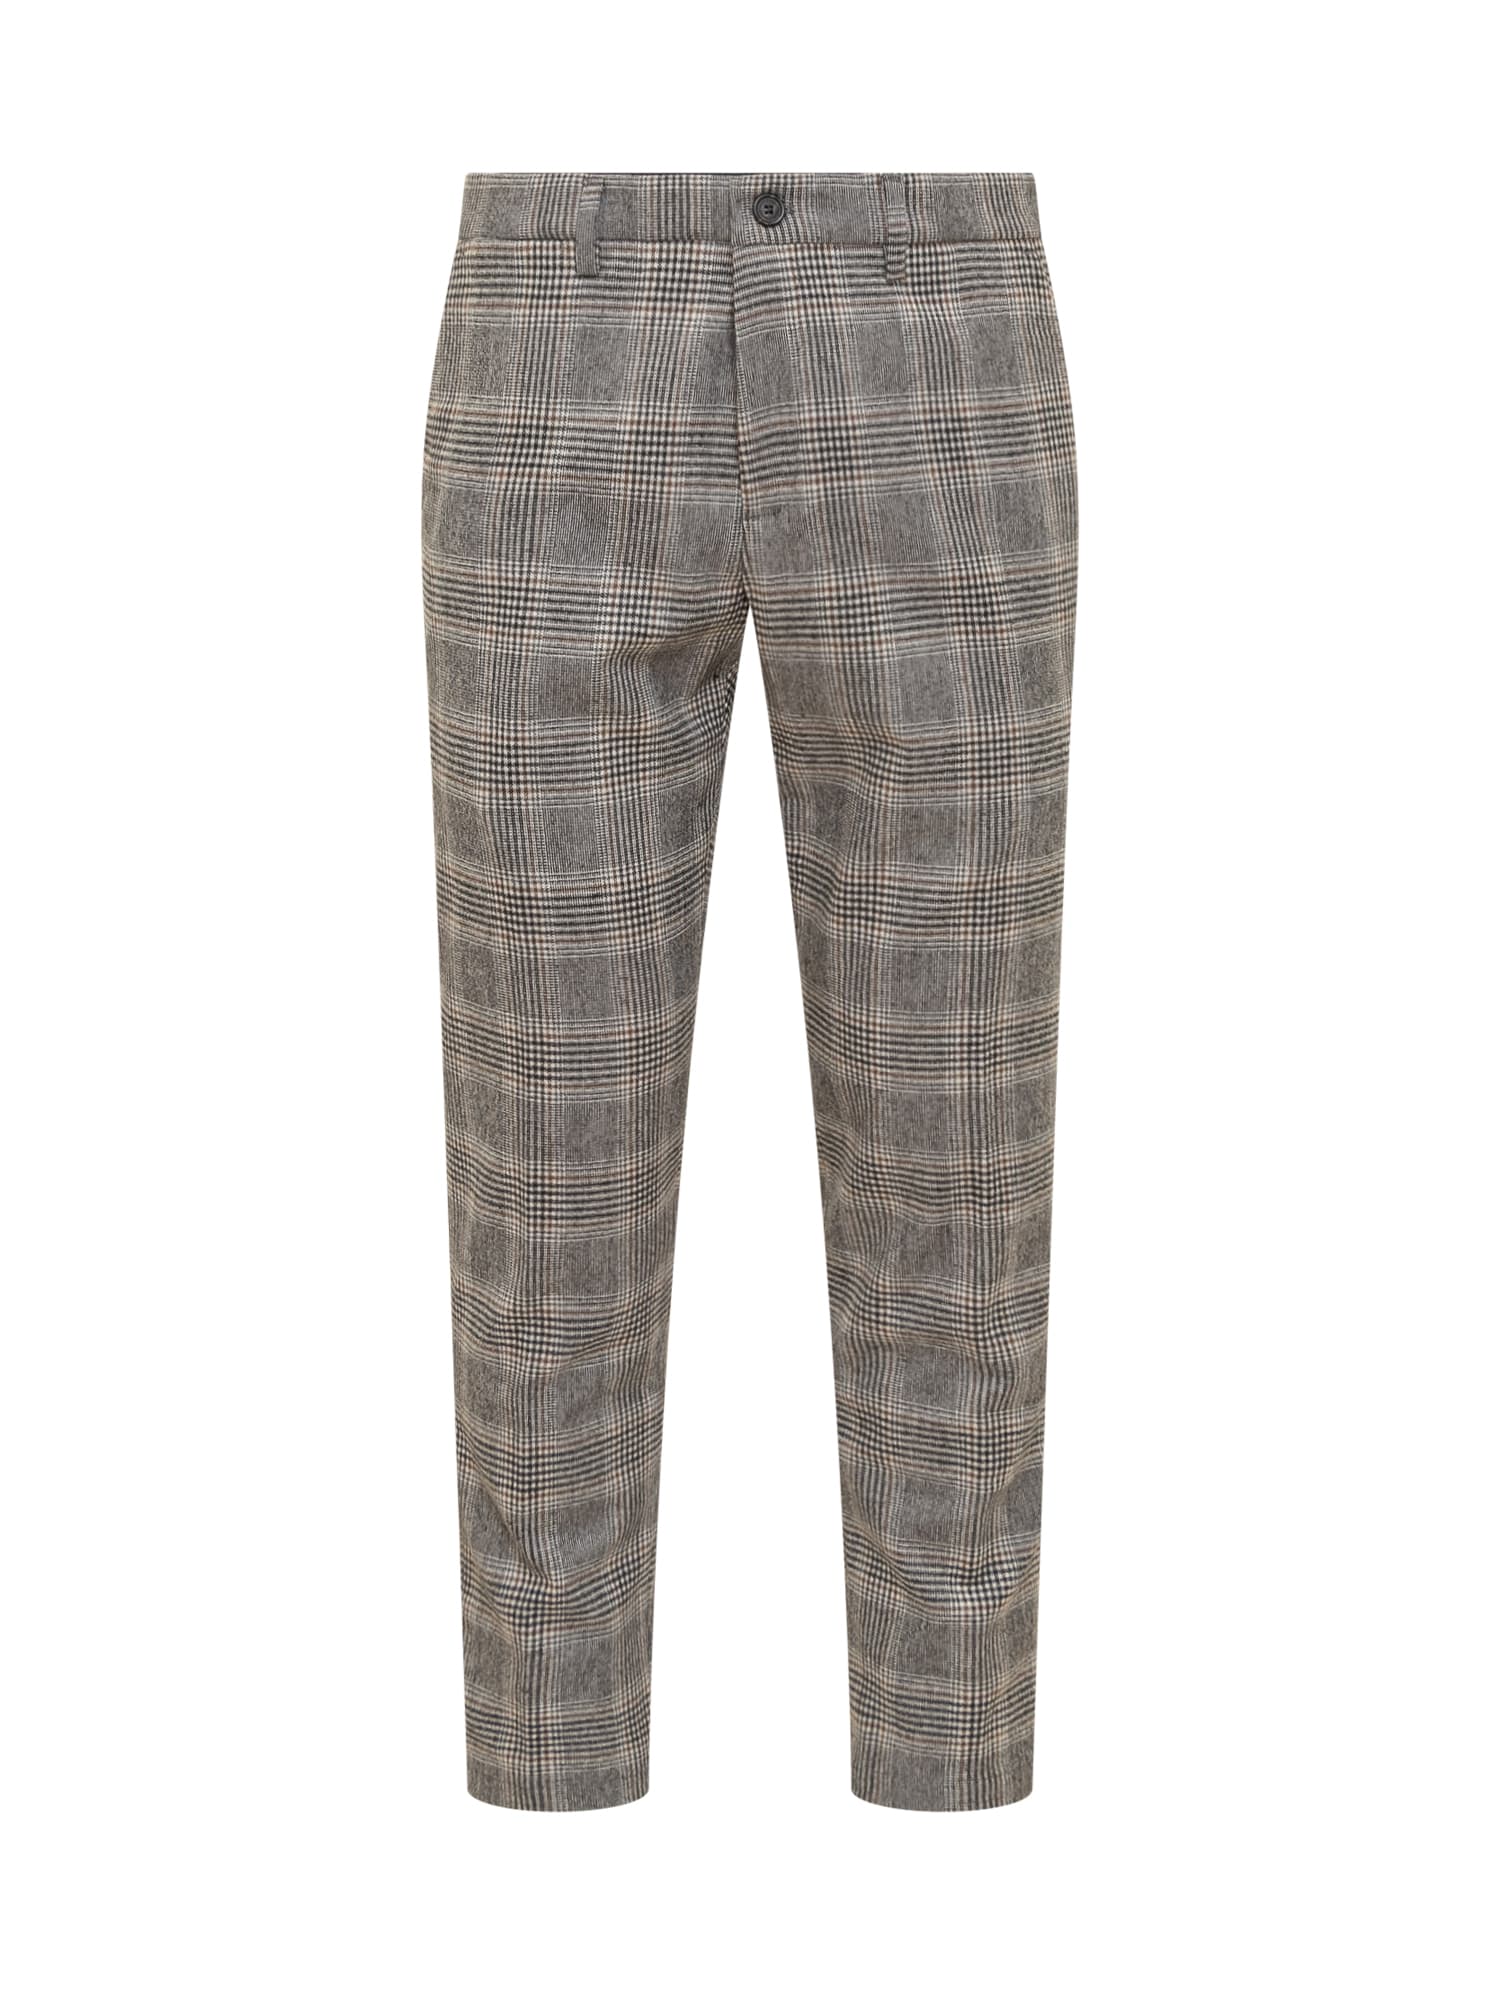 Department Five Setter Trousers In Unica